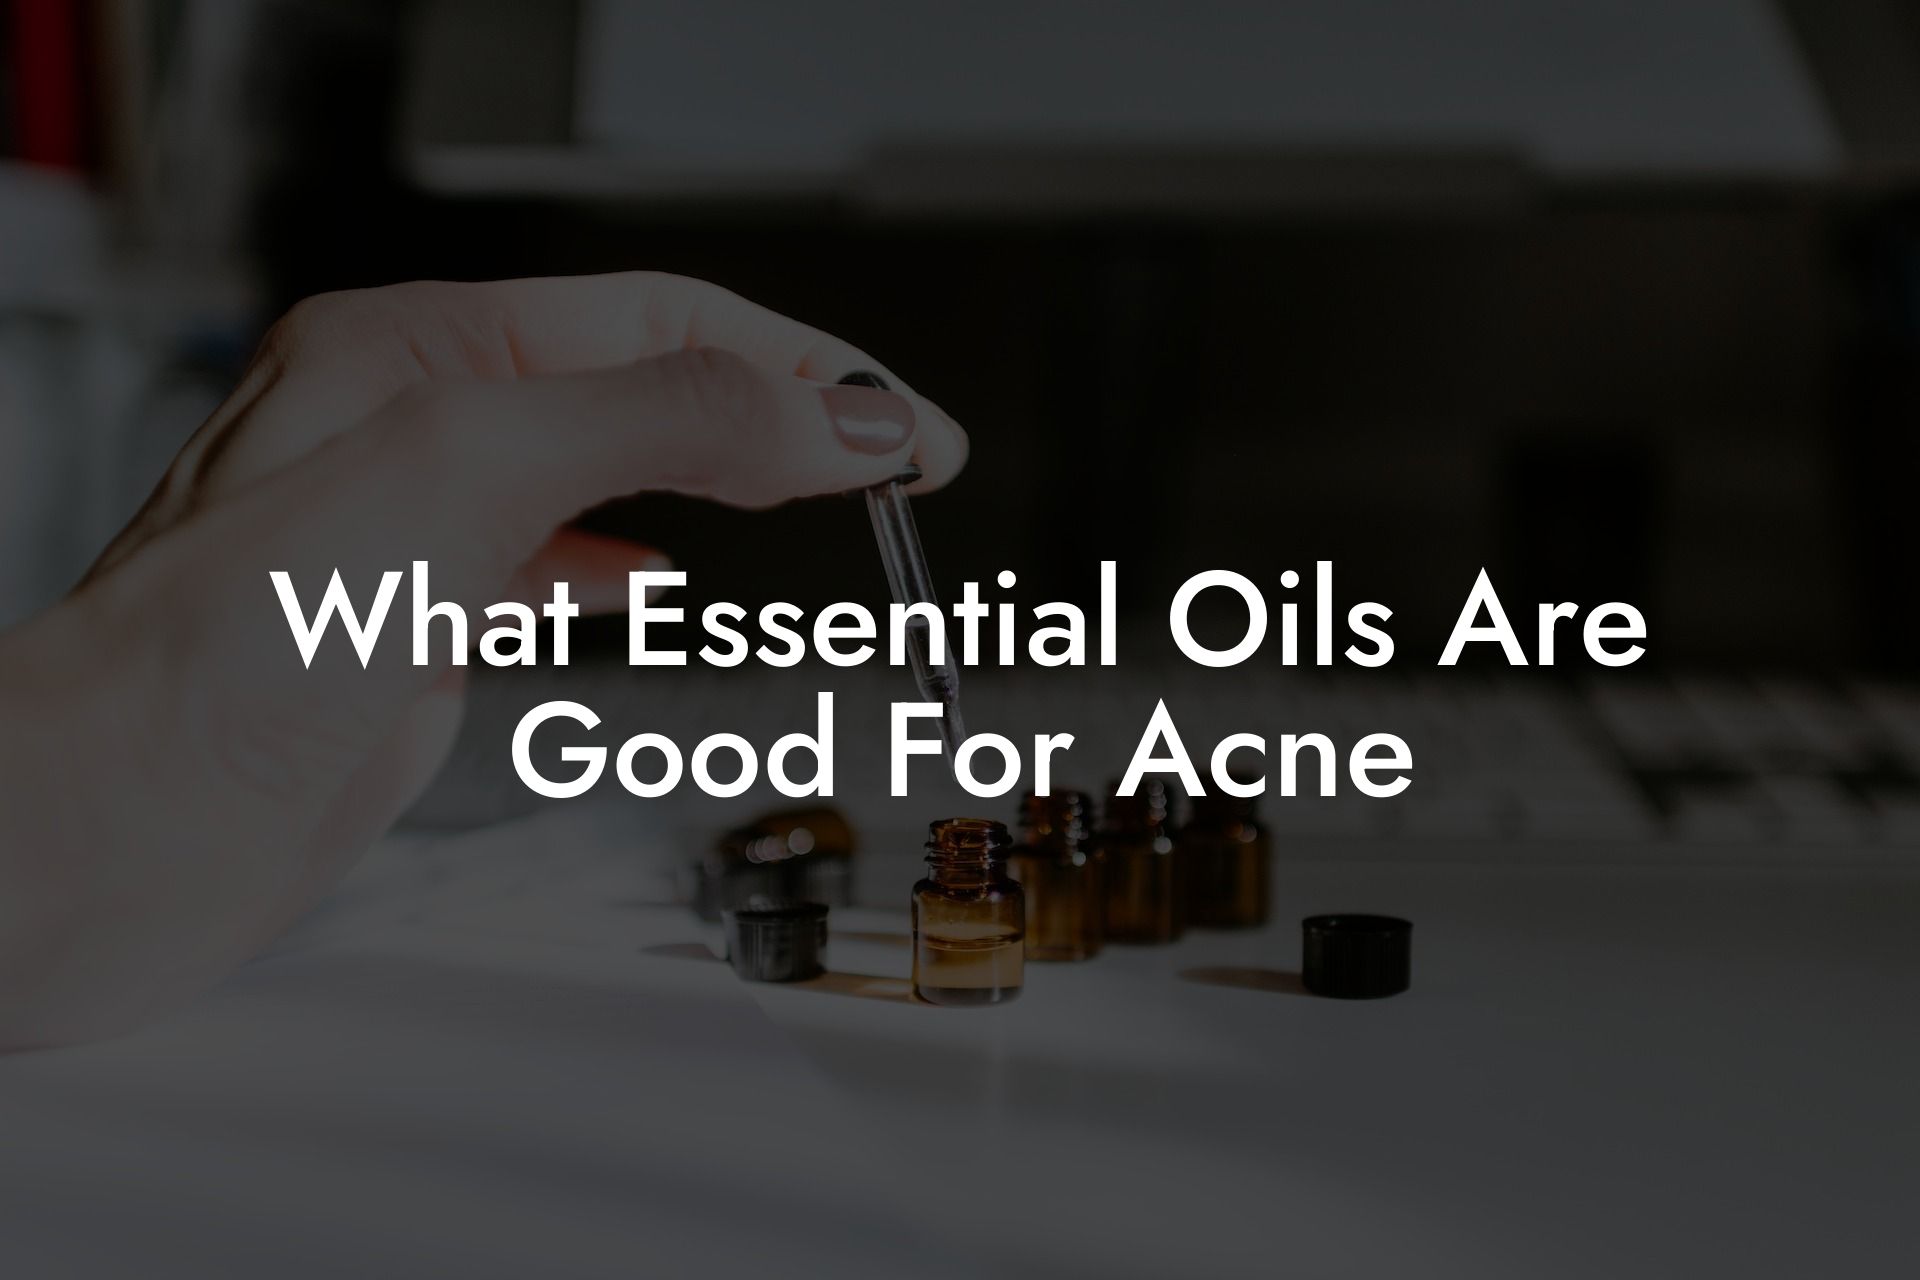 What Essential Oils Are Good For Acne